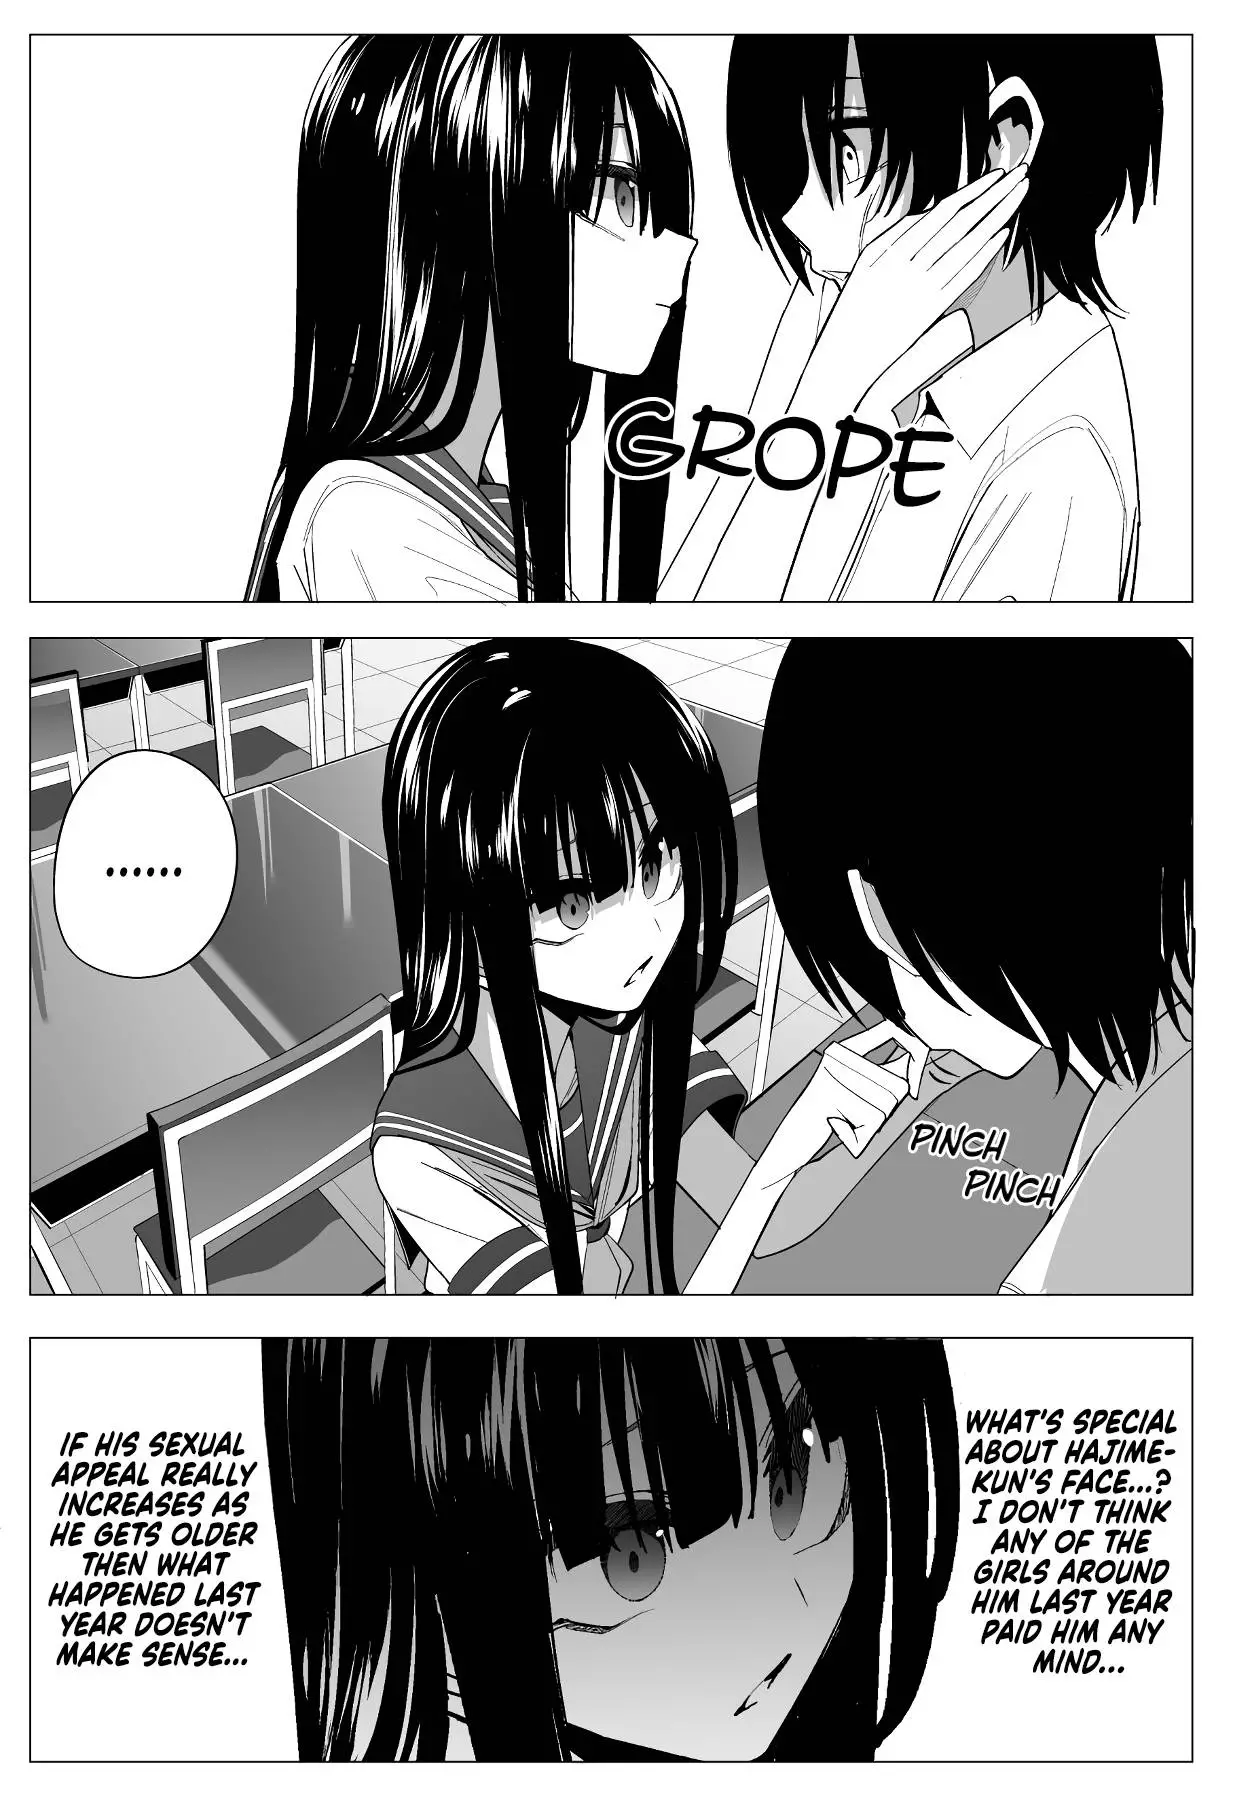 Mitsuishi-San Is Being Weird This Year - 21 page 5-913c40b8